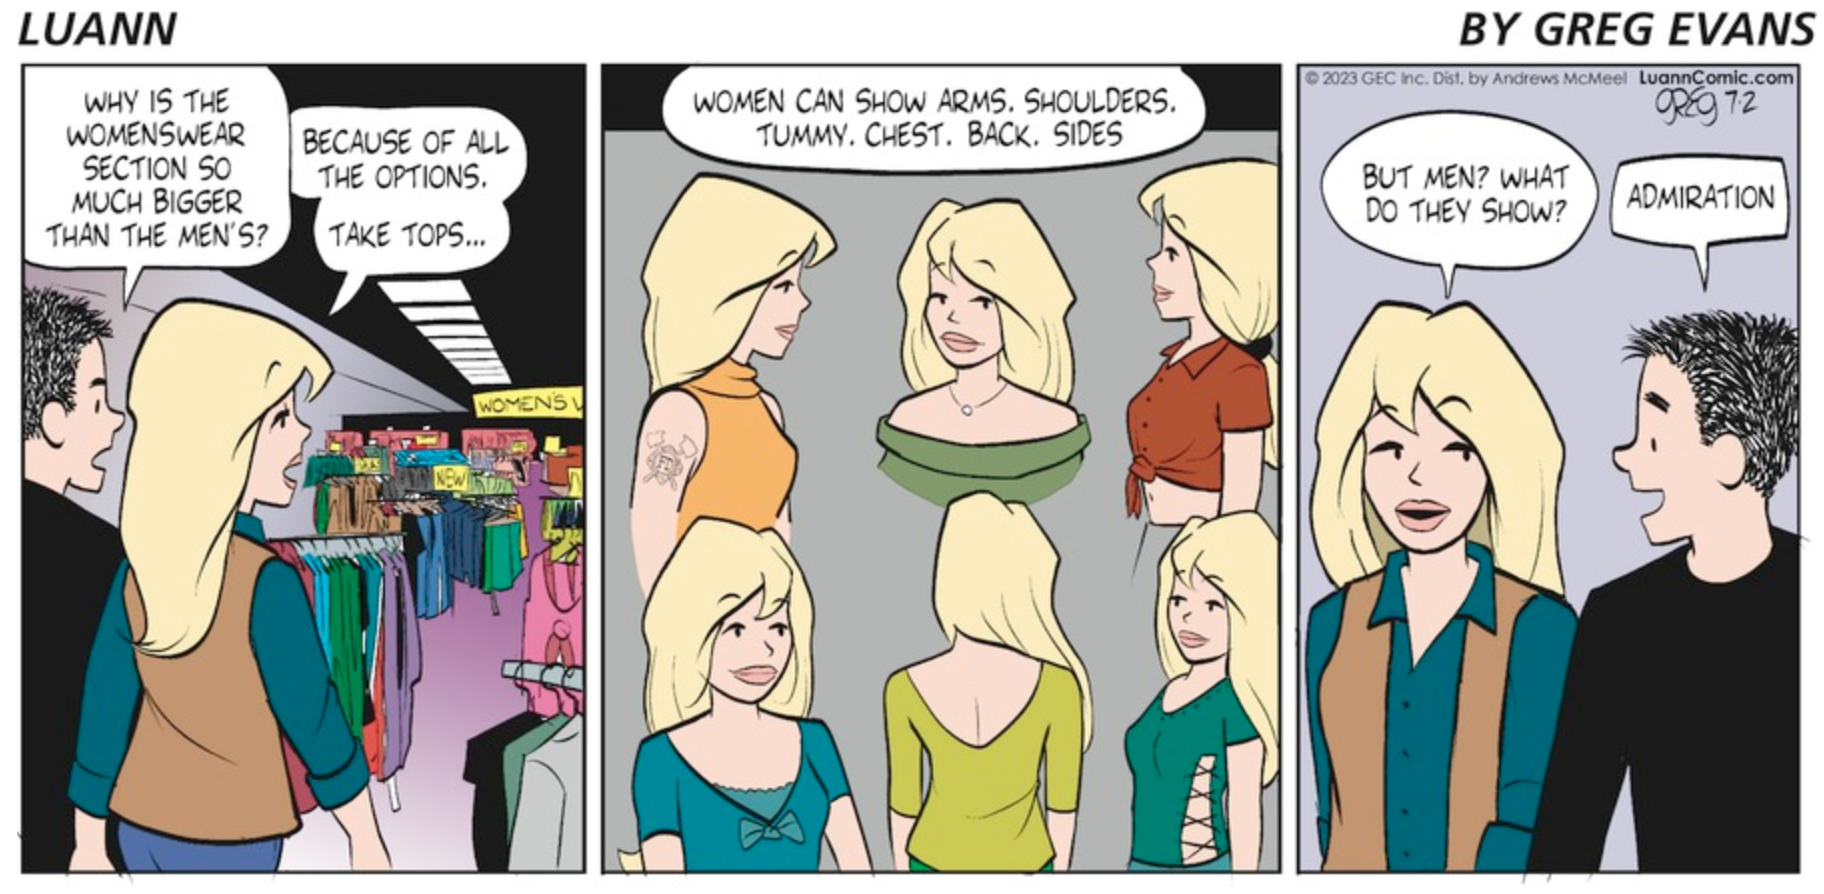 Three panels: In the first, Brad and Toni are walking in the womens clothing section of a store. Brad asks, 'why is the womenswear section so much bigger than the mens'?' And Toni replies, 'Because of all the options. Take tops...' The next panel shows Toni wearing six tops that are cut in ways that match her description of 'Women can show arms, shoulders, tummy, chest, back, sides'. In the last panel we see Brad and Toni face on, and Toni, with an amused expression asks, 'But men? What do they show?' and Brad, replies 'Admiration' with a dumb smile on his face